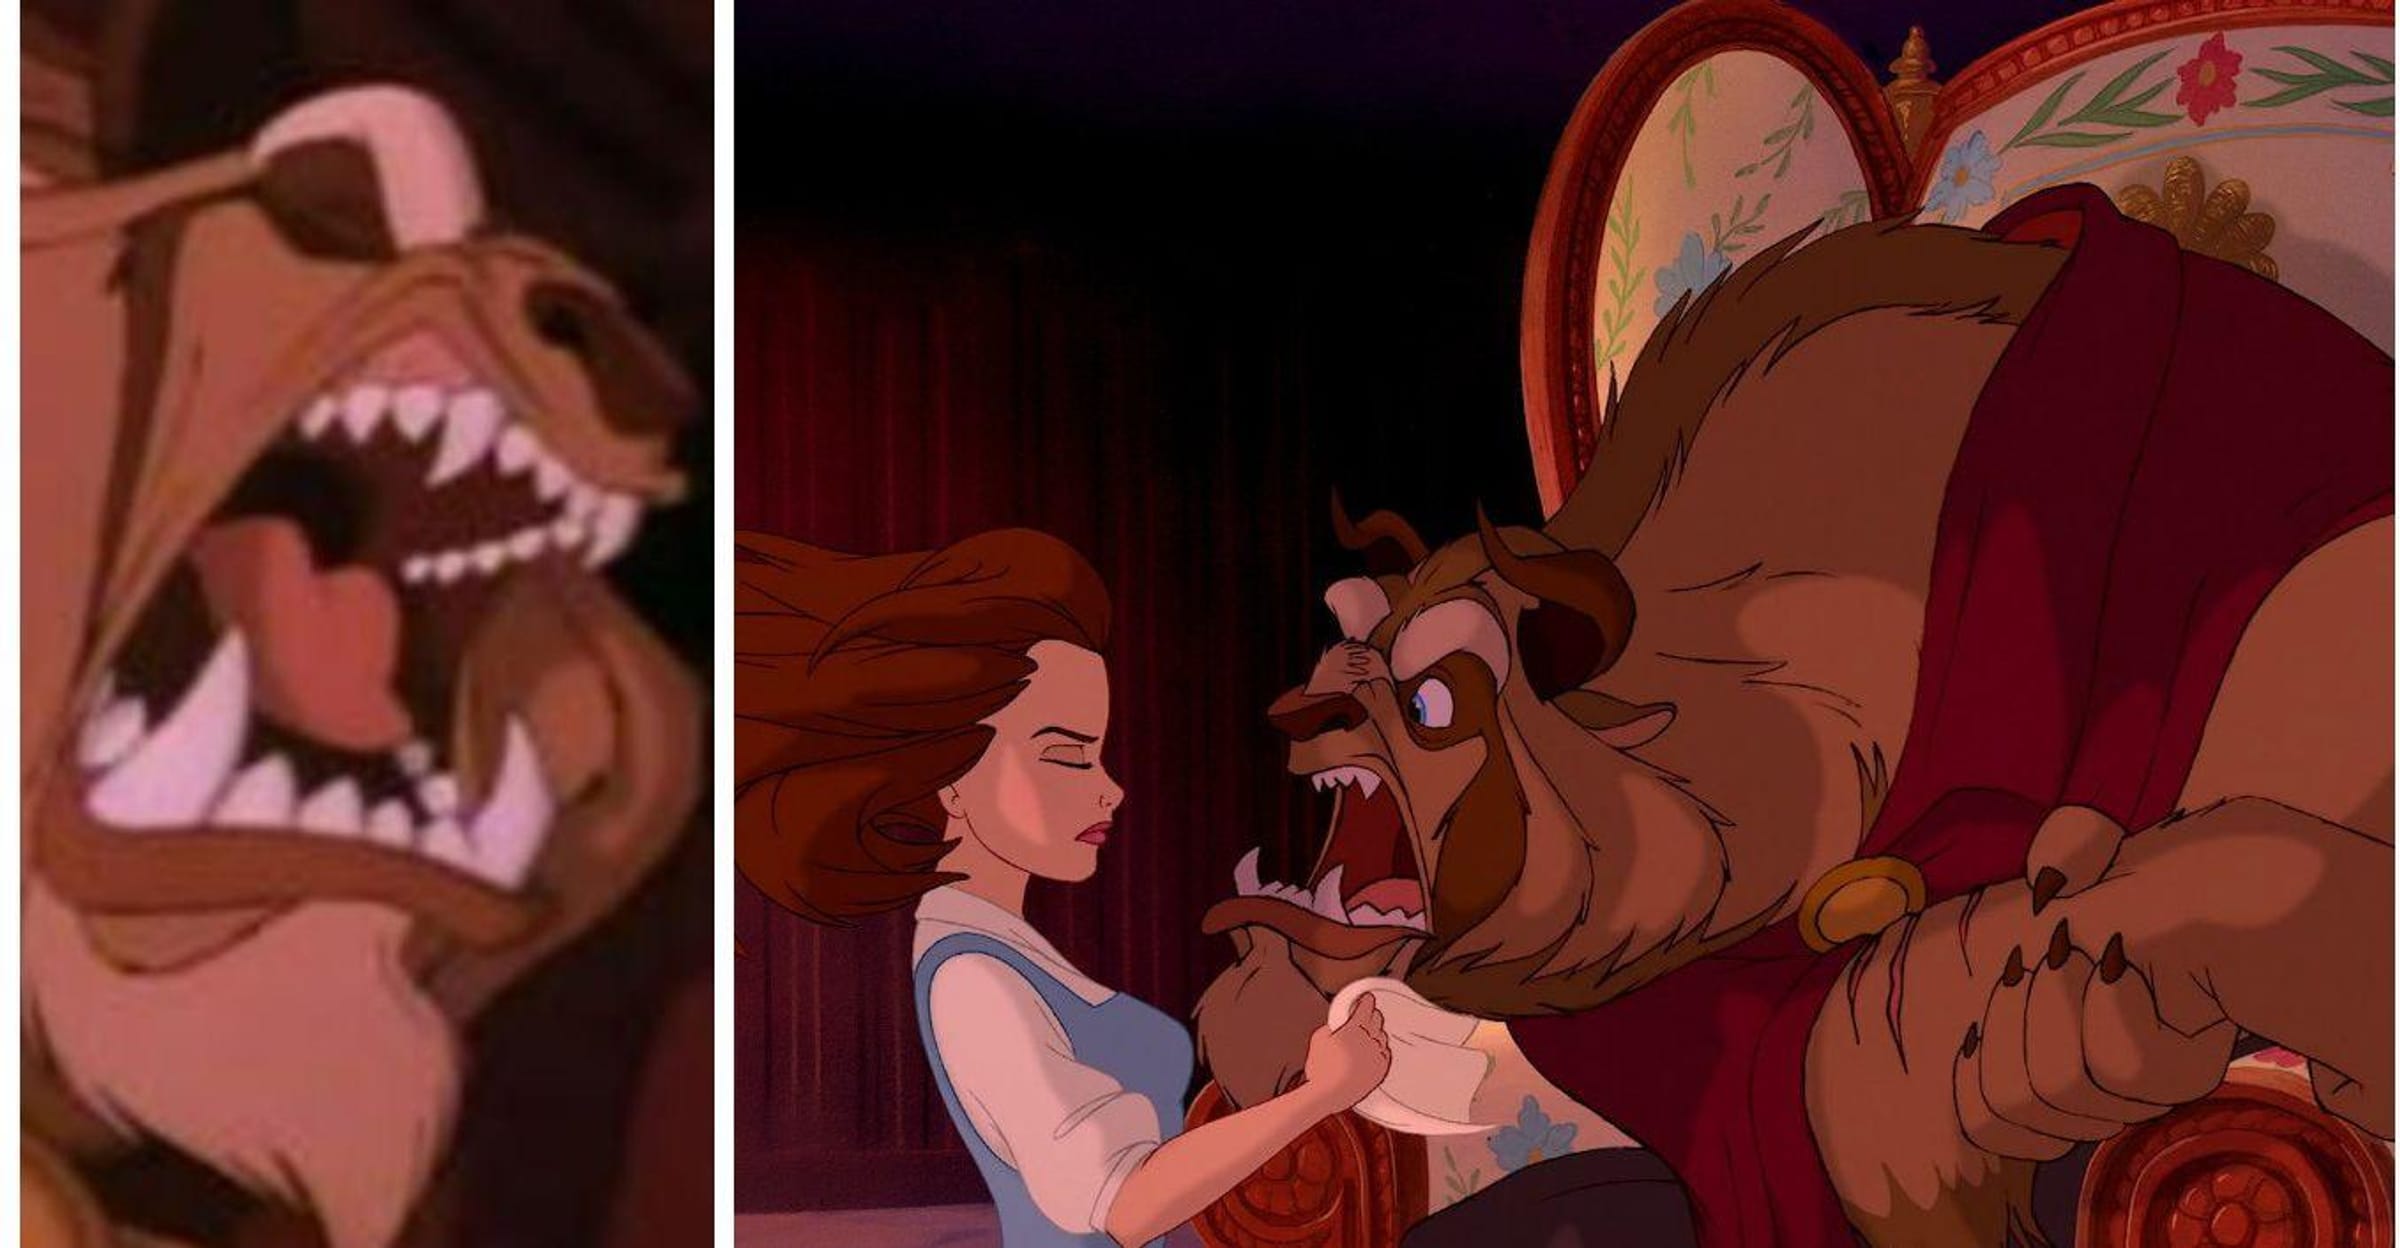 Beauty And The Beast Disney Cartoon Porn - Beauty and the Beast porn pics wait for you to check them up